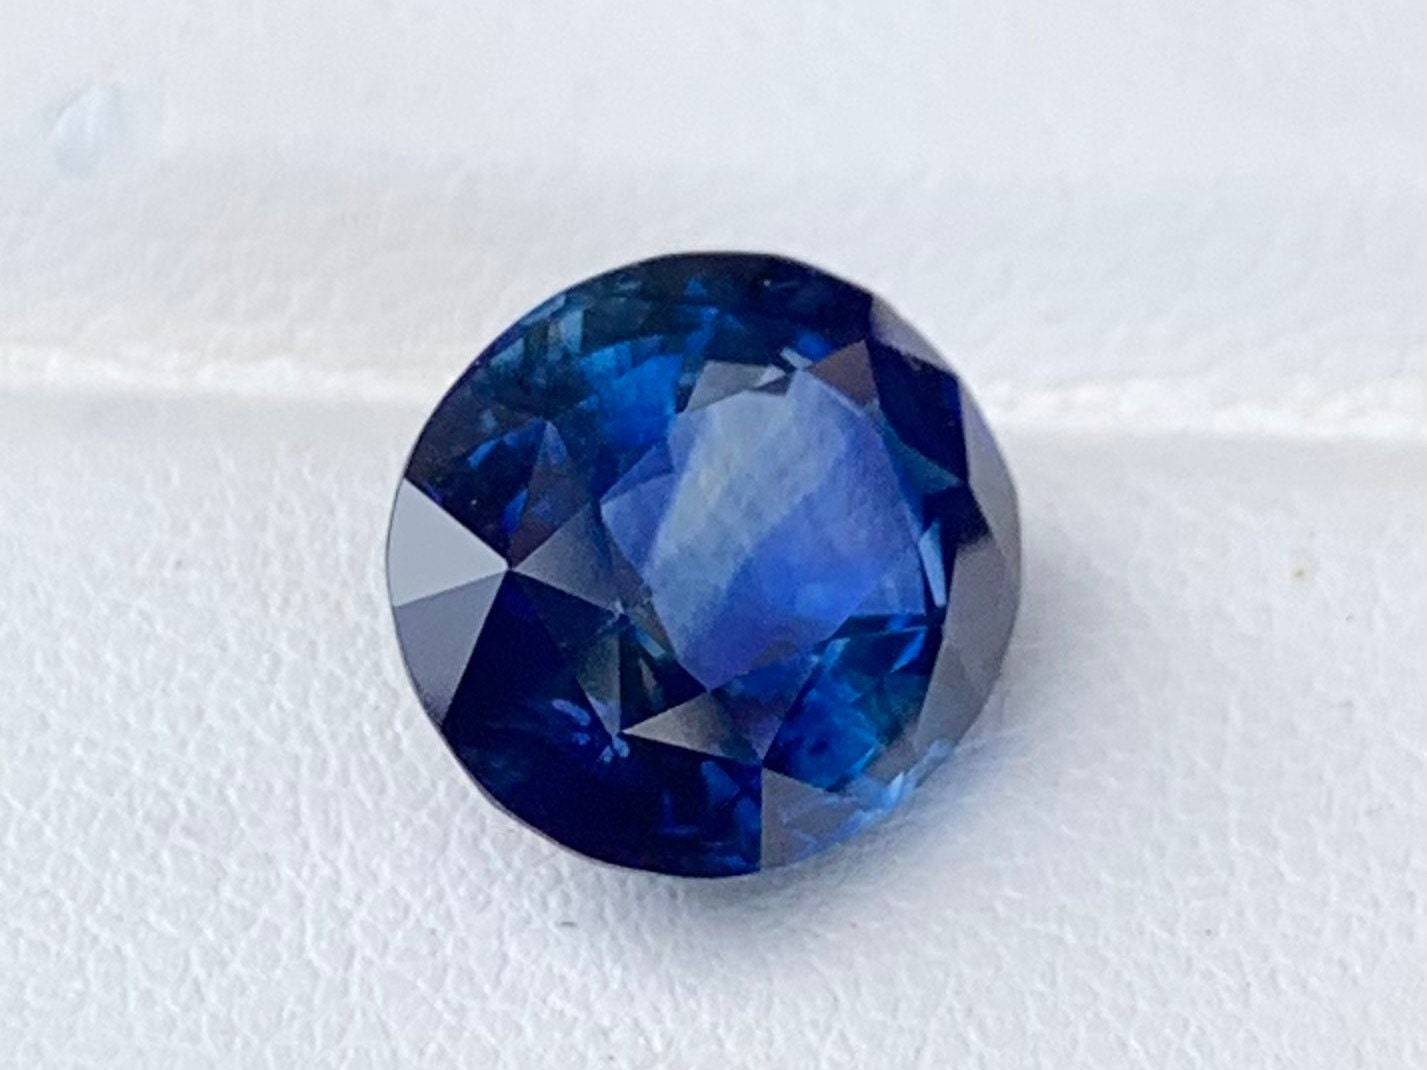 Blue sapphire 7.14 Cts, Natural Blue Sapphire, Blue sapphire for Engagement ring, Ceylon Blue Sapphire, Blue Sapphire Gift For her - Baza Boutique 